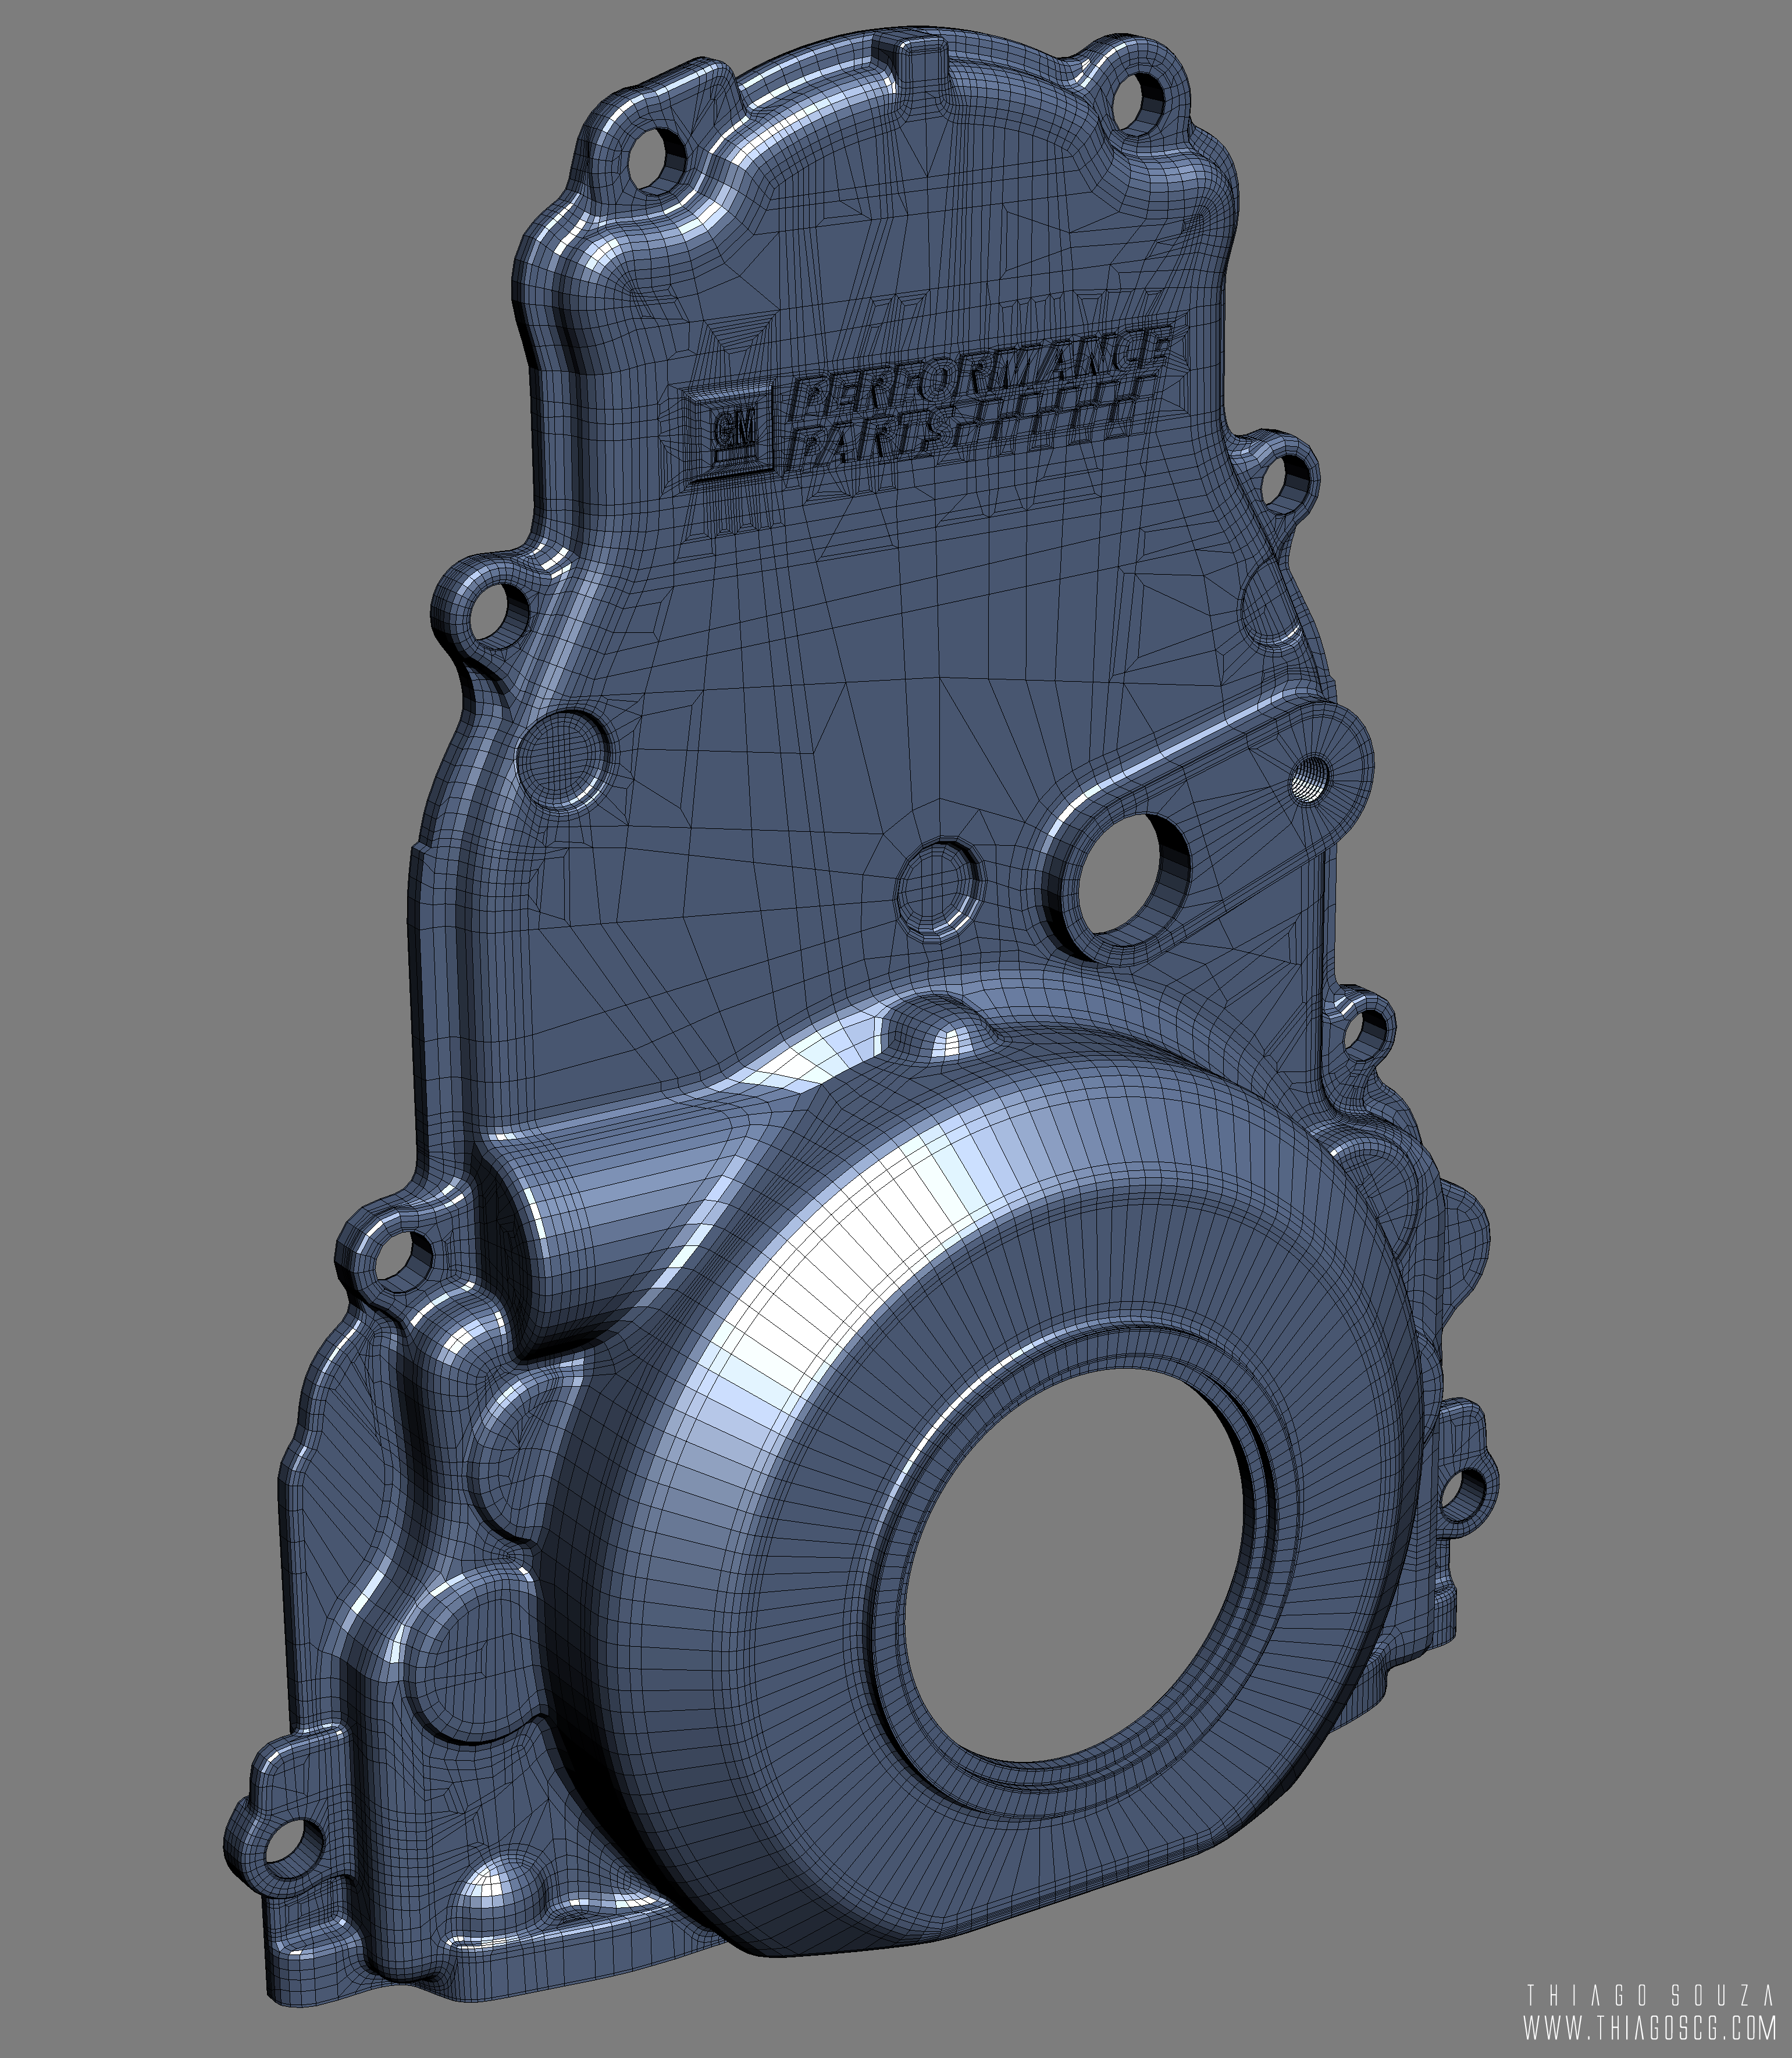 Timing_chain_viewport_wireframe_01.png